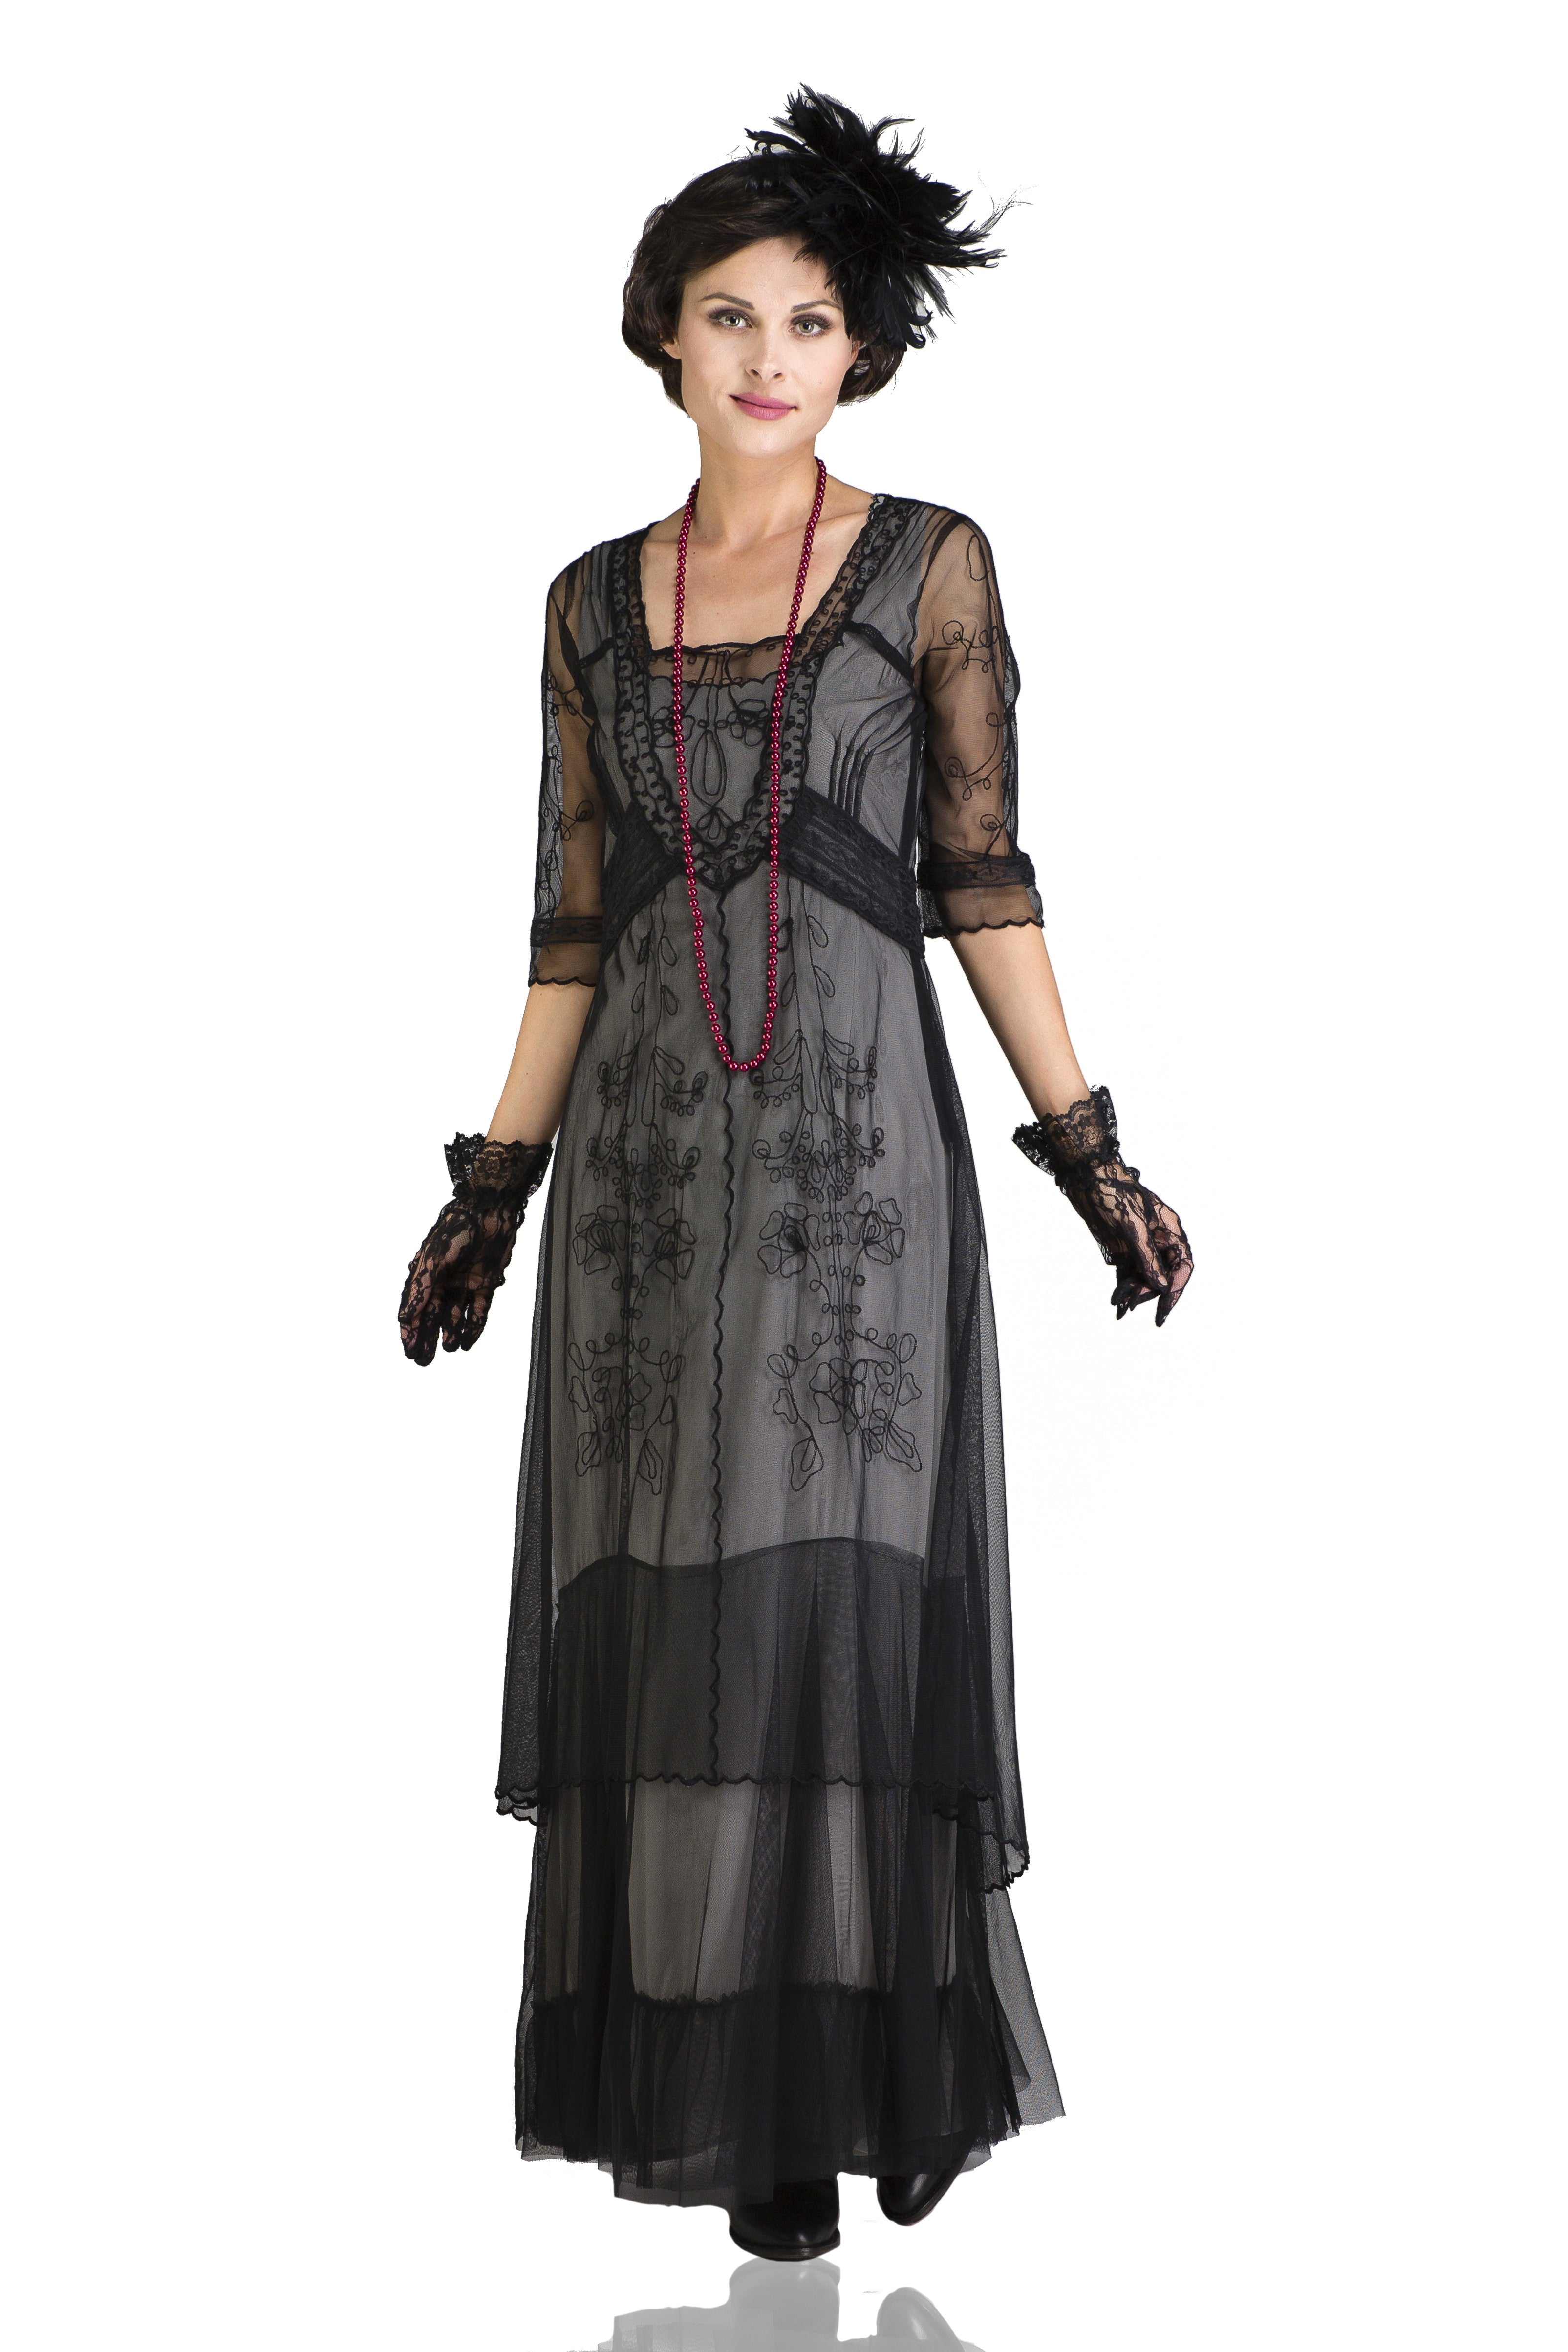 Steampunk Dresses | Women & Girl Costumes Victoria Vintage Style Party Gown in Black by Nataya $265.00 AT vintagedancer.com